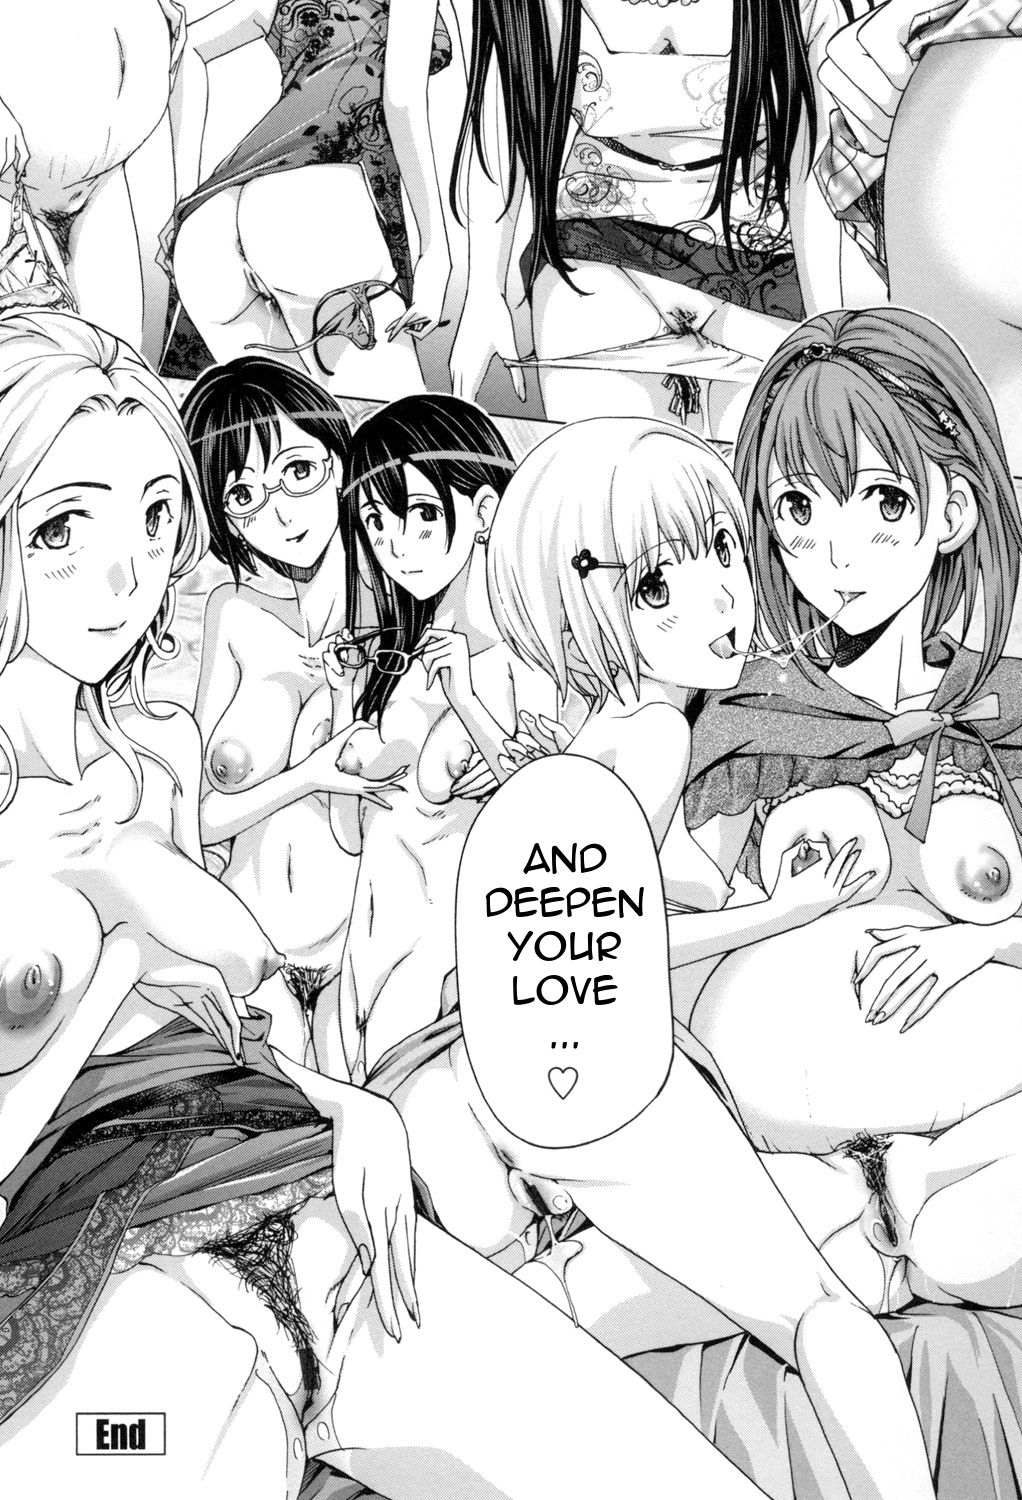 [Asagi Ryu] Onee-san to Aishiacchaou! - Let's Love with Your Sister | Making Love with an Older Woman [English] [Junryuu] 193